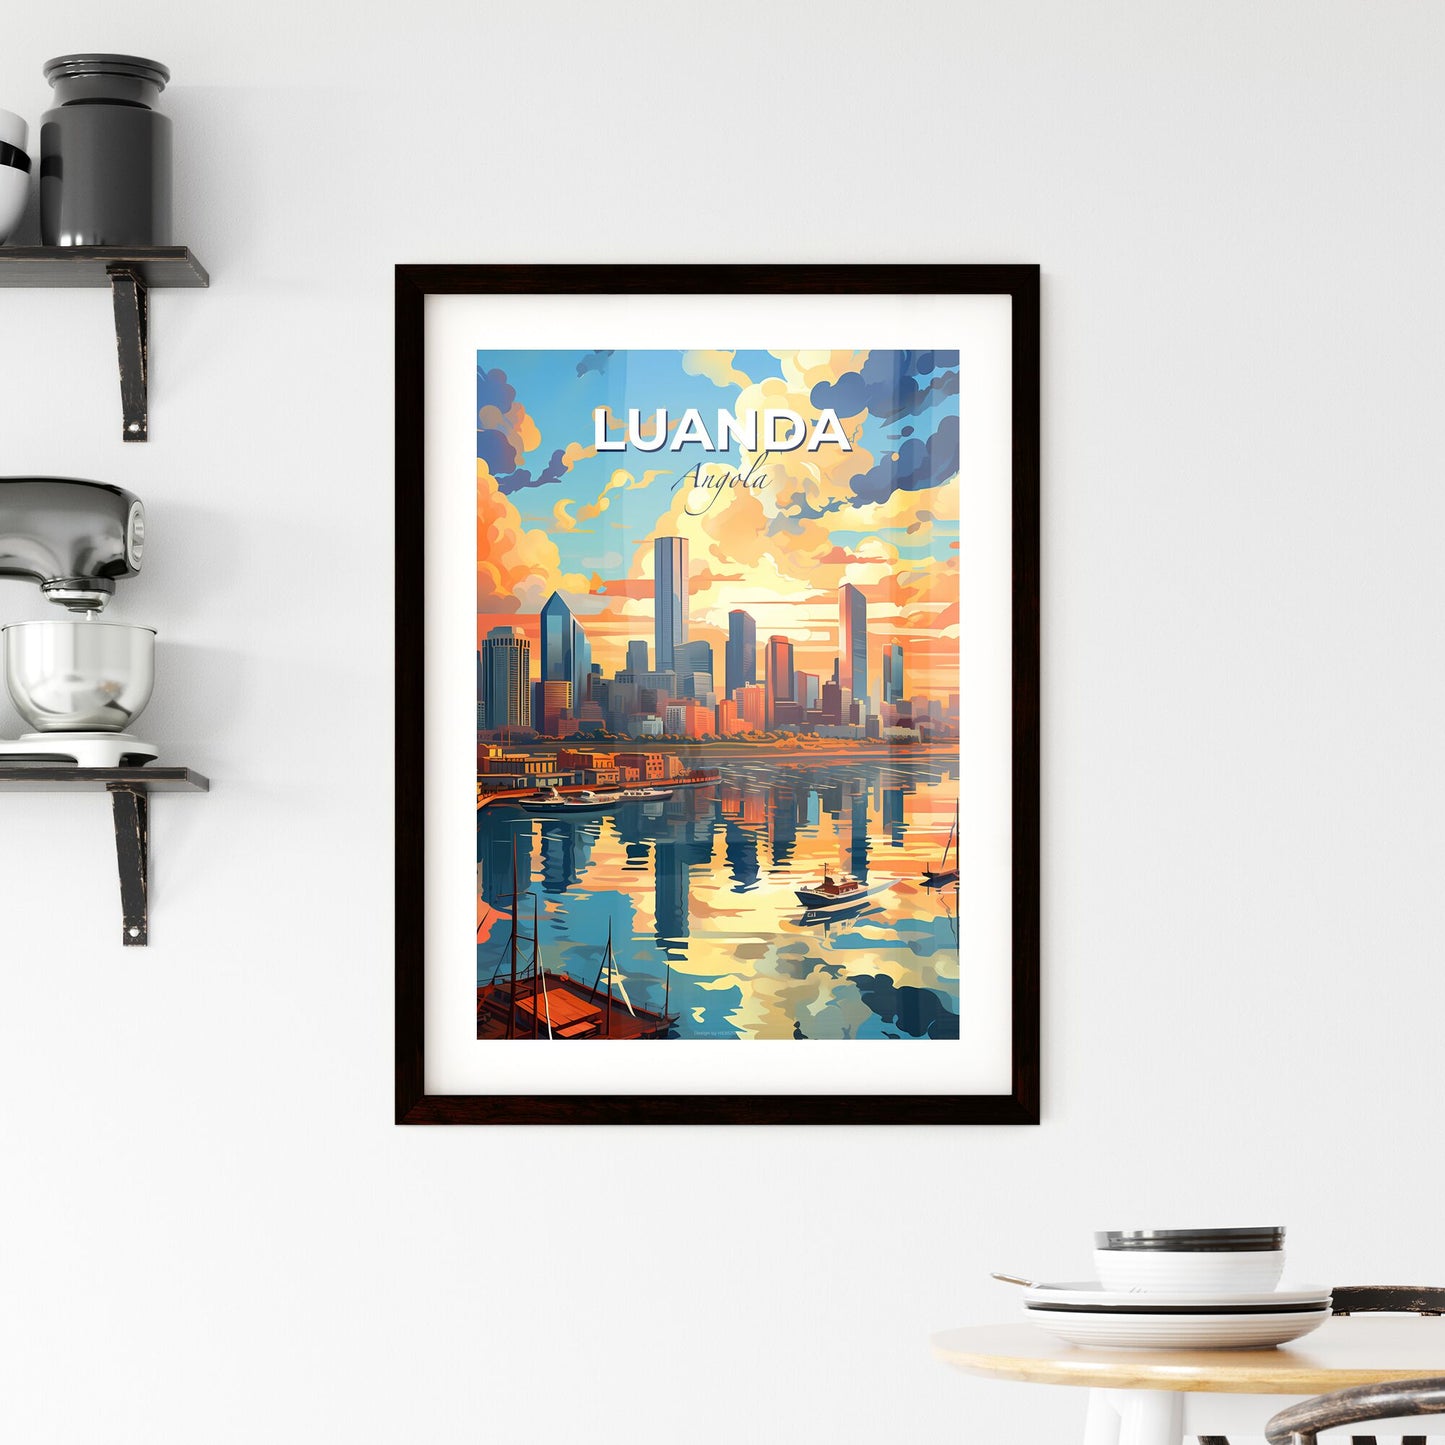 Vibrant Luanda Angola City Skyline Art Painting with Boats on Water Default Title